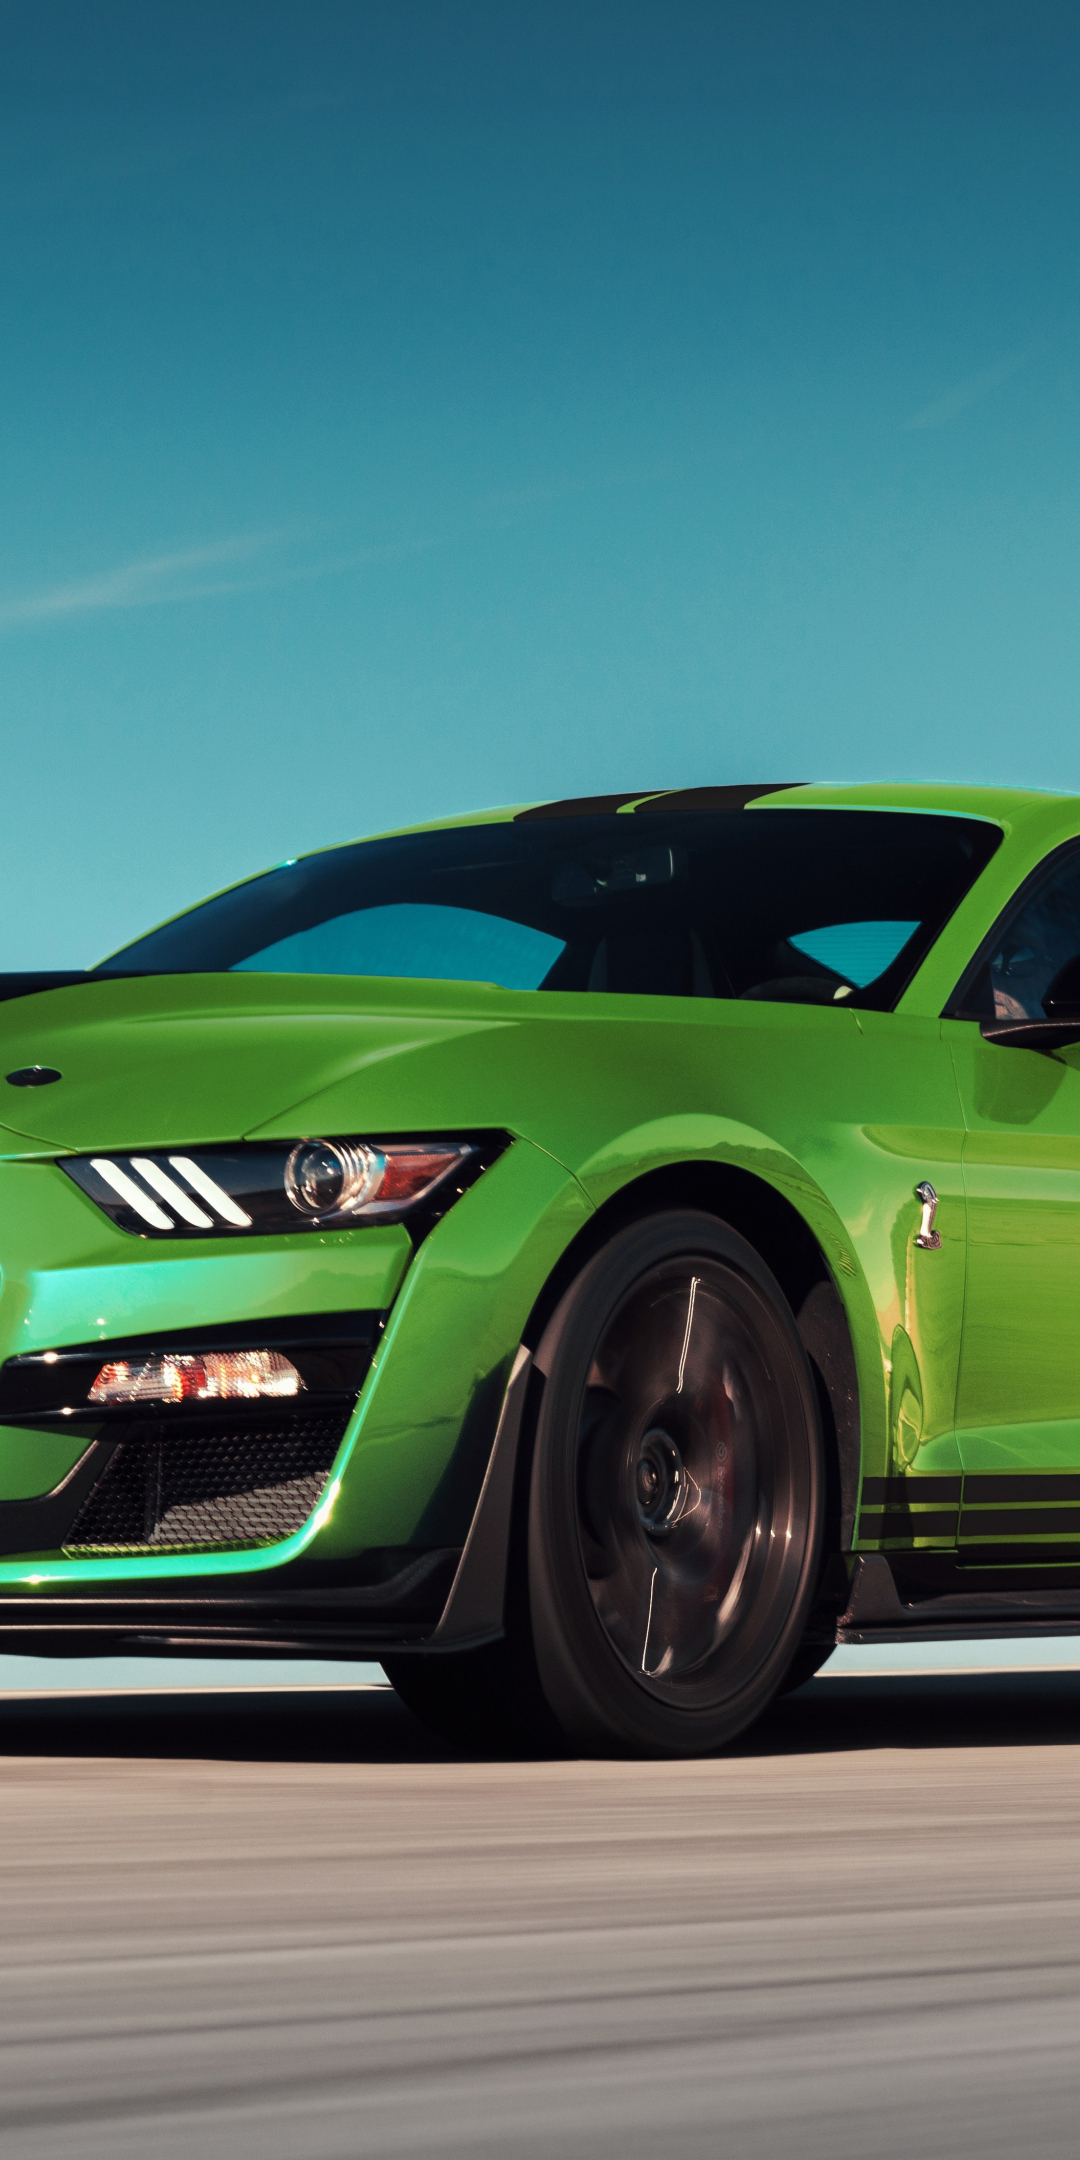 Download wallpaper 1080x2160 green, ford mustang shelby gt500, honor 7x,  honor 9 lite, honor view 10, 1080x2160 hd background, 24402